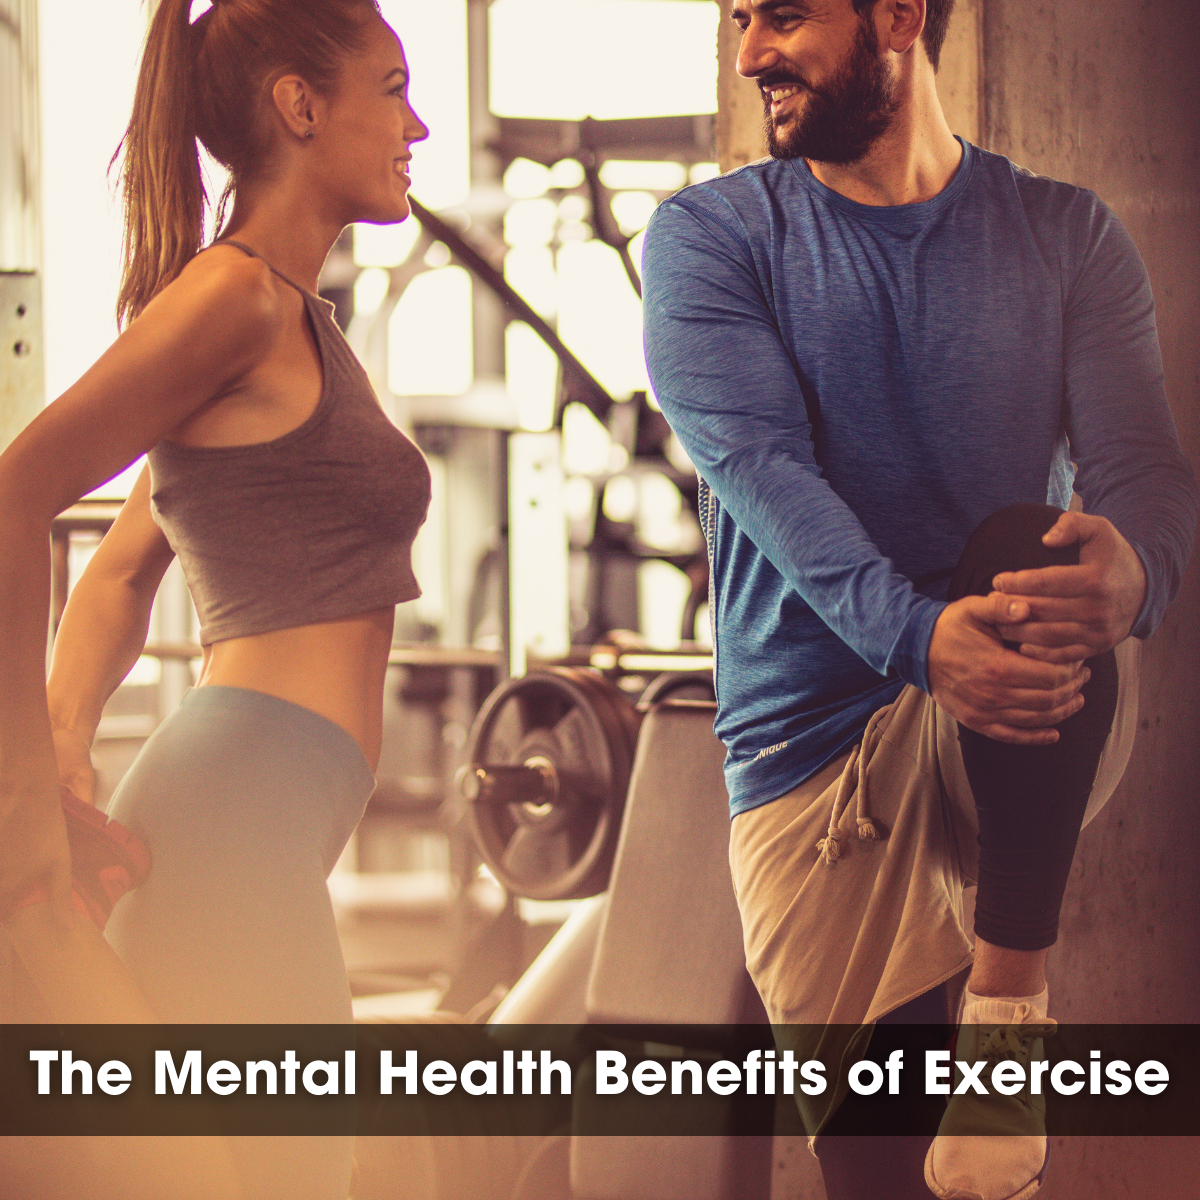 The Mental Health Benefits of Exercise